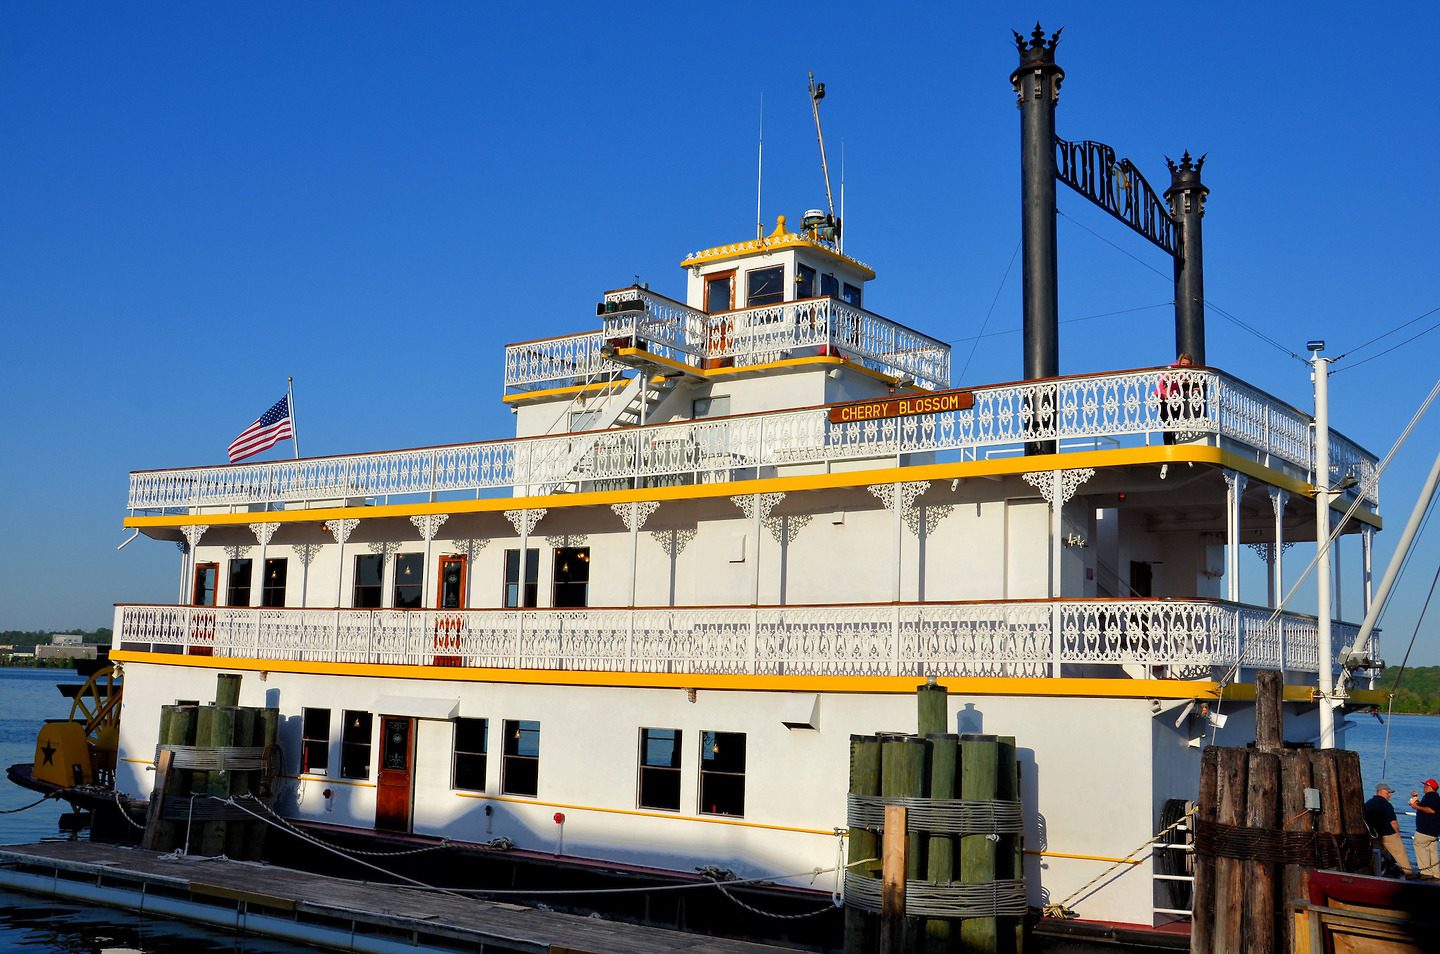 riverboat on the potomac events